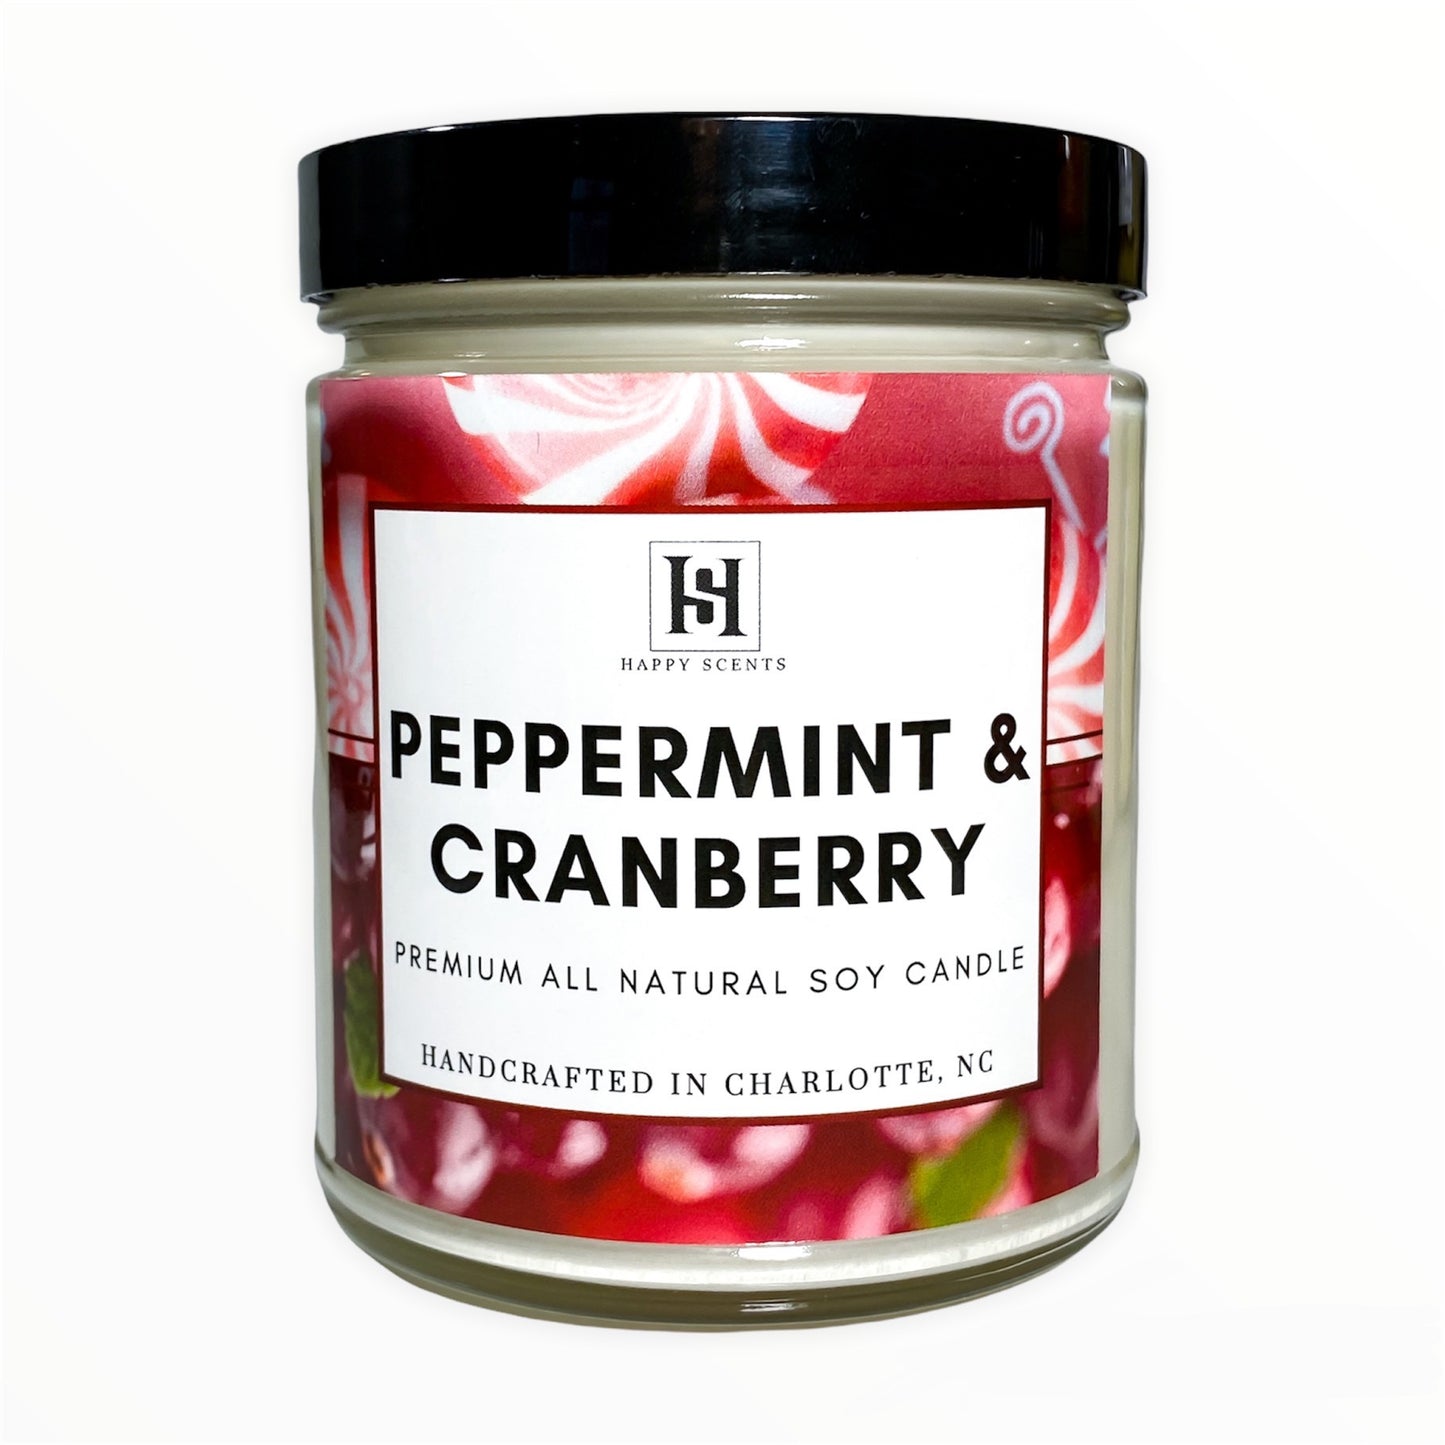 Peppermint & Cranberry Candle. Made of all natural soy wax. Clean Burning Candle